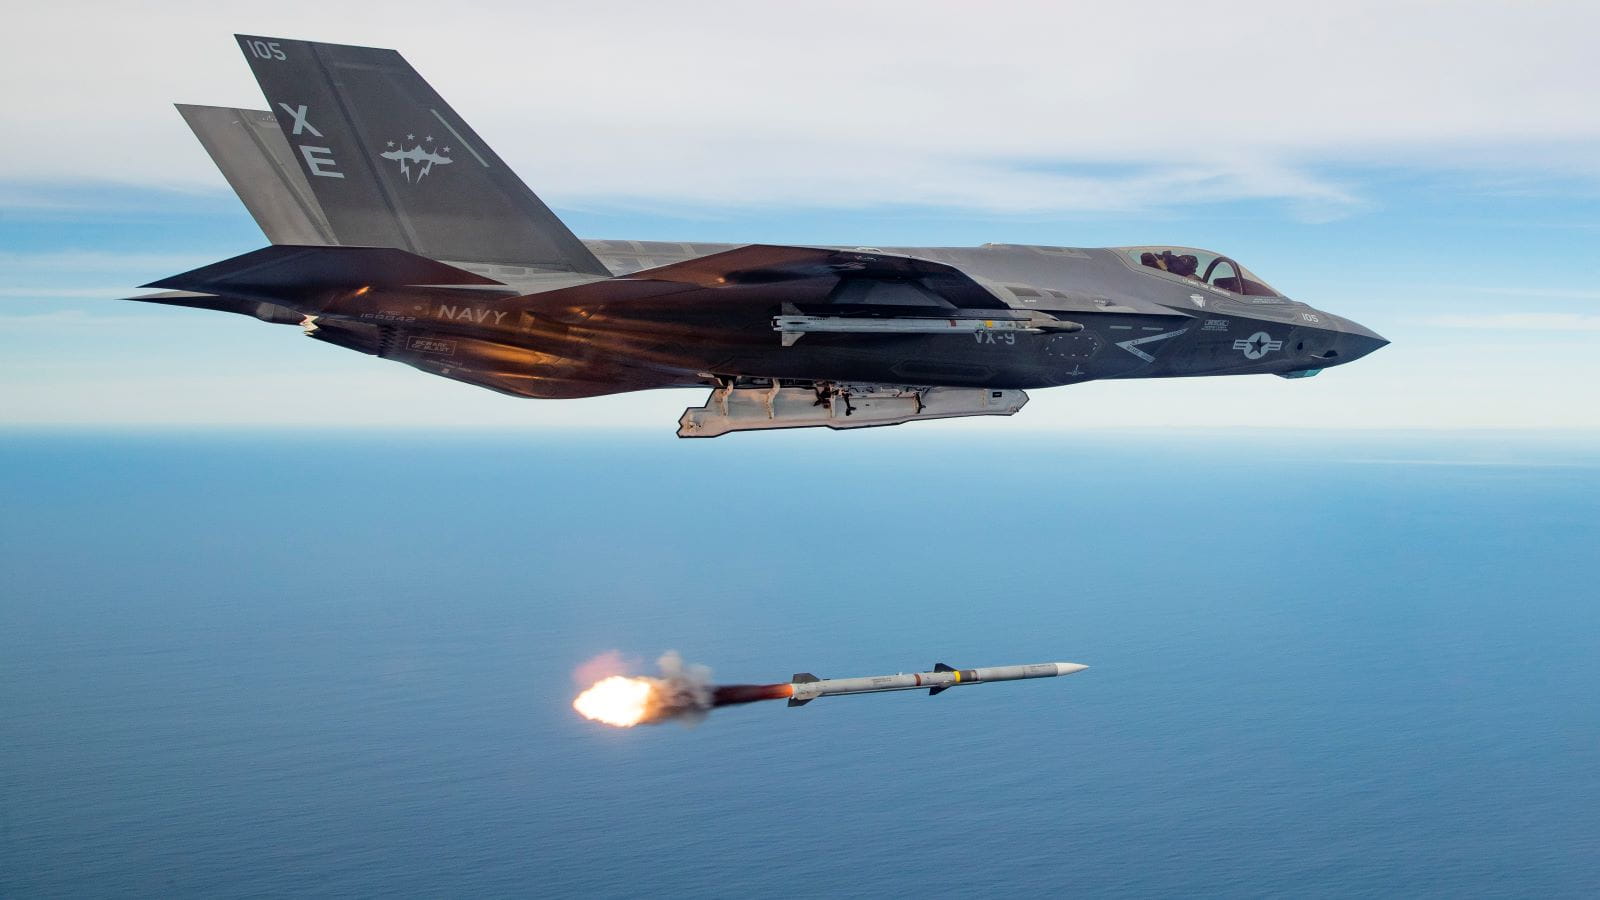 An AMRAAM missile is fired from an F-35